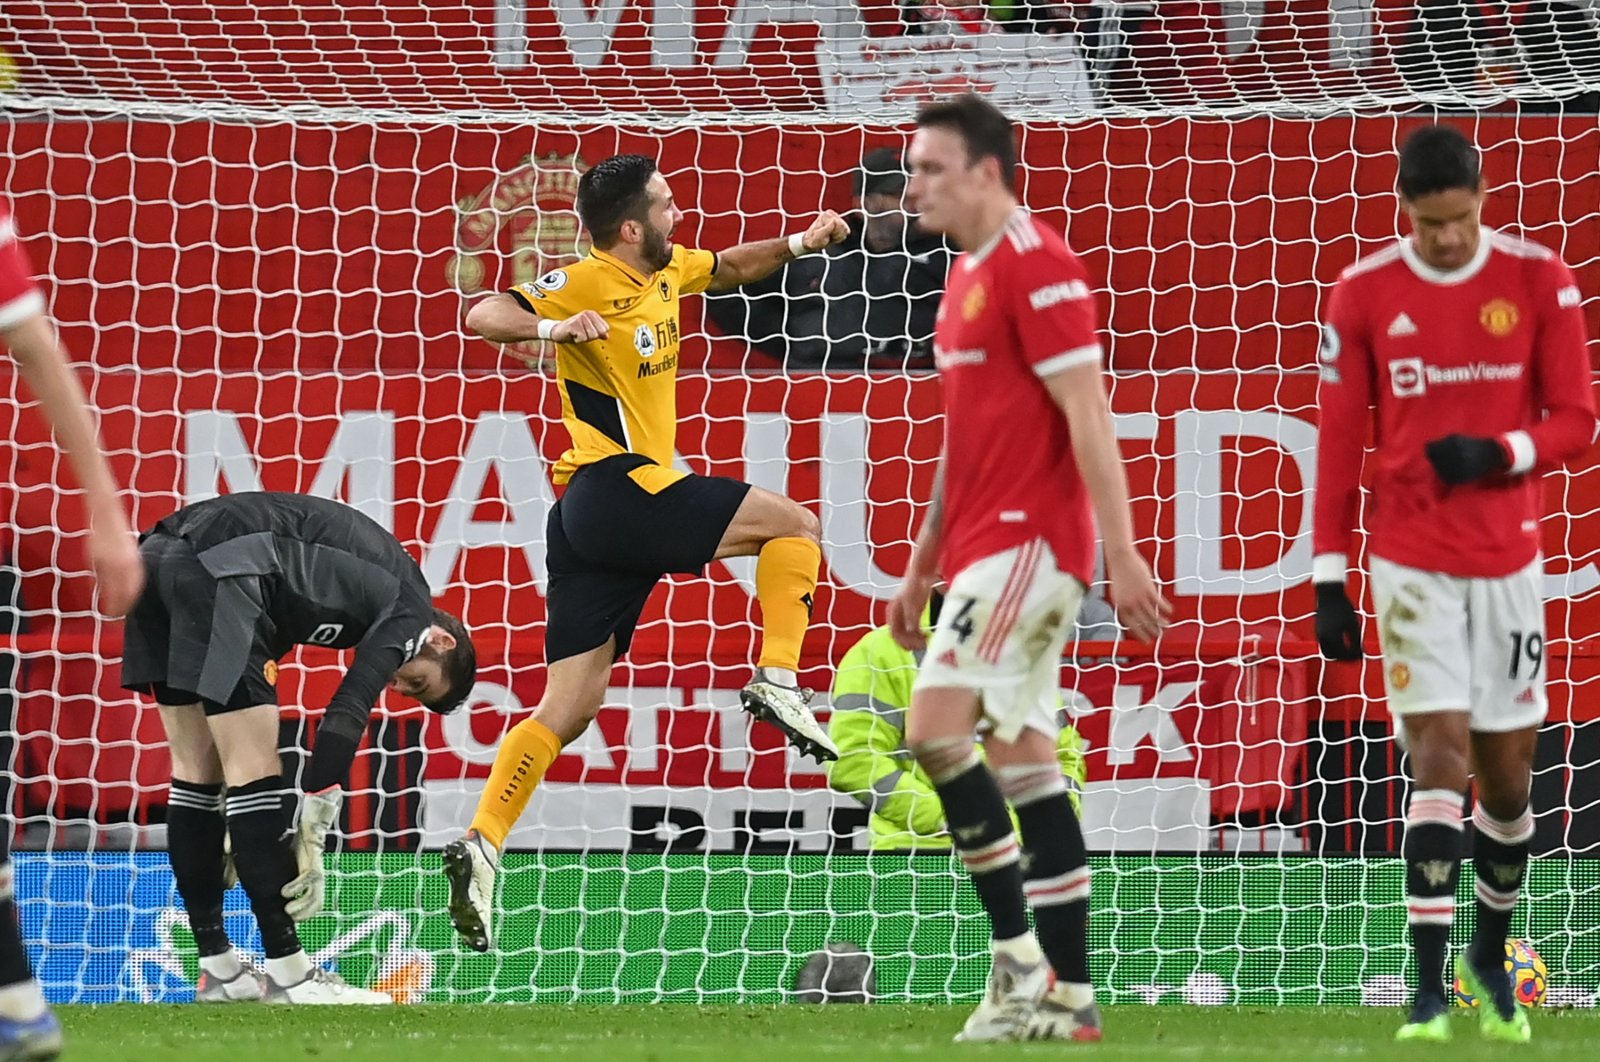 Wolverhampton Wanderers&#039; Joao Moutinho (C) celebrates after scoring in a Premier League match against Manchester United at Old Trafford in Manchester, England, Jan. 3, 2022. (AFP Photo)